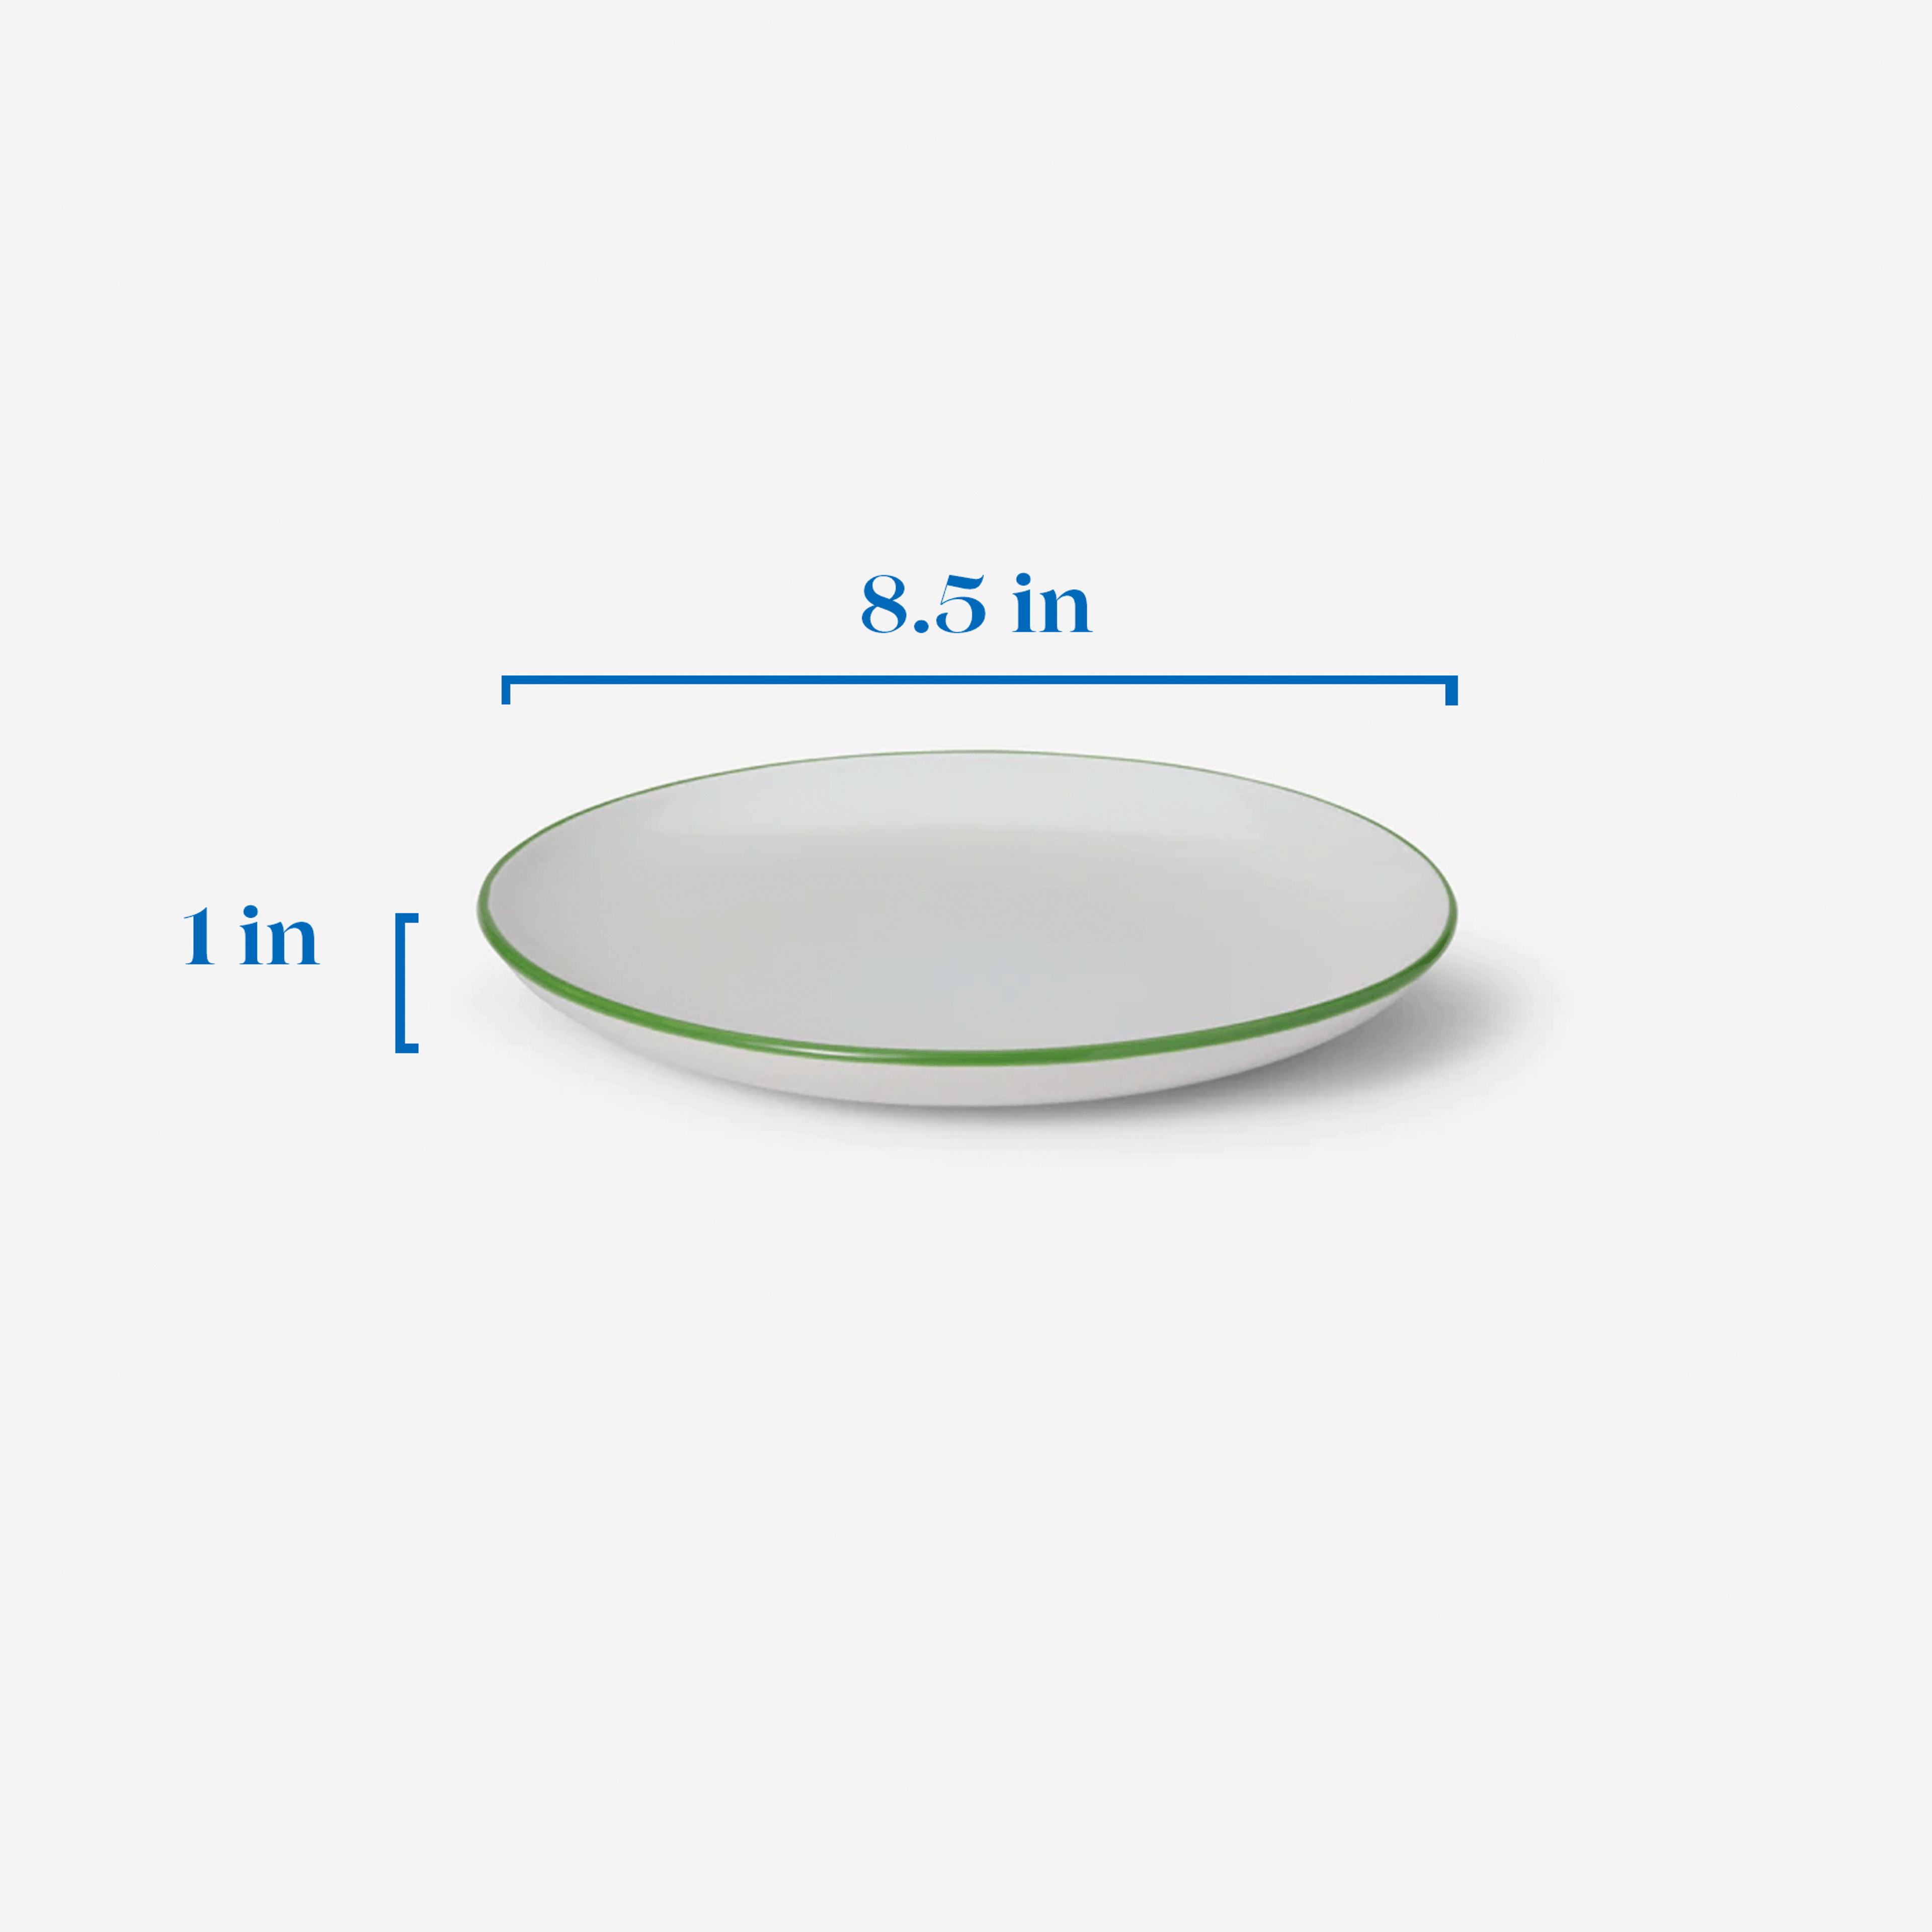 Small Plate - Set of 4